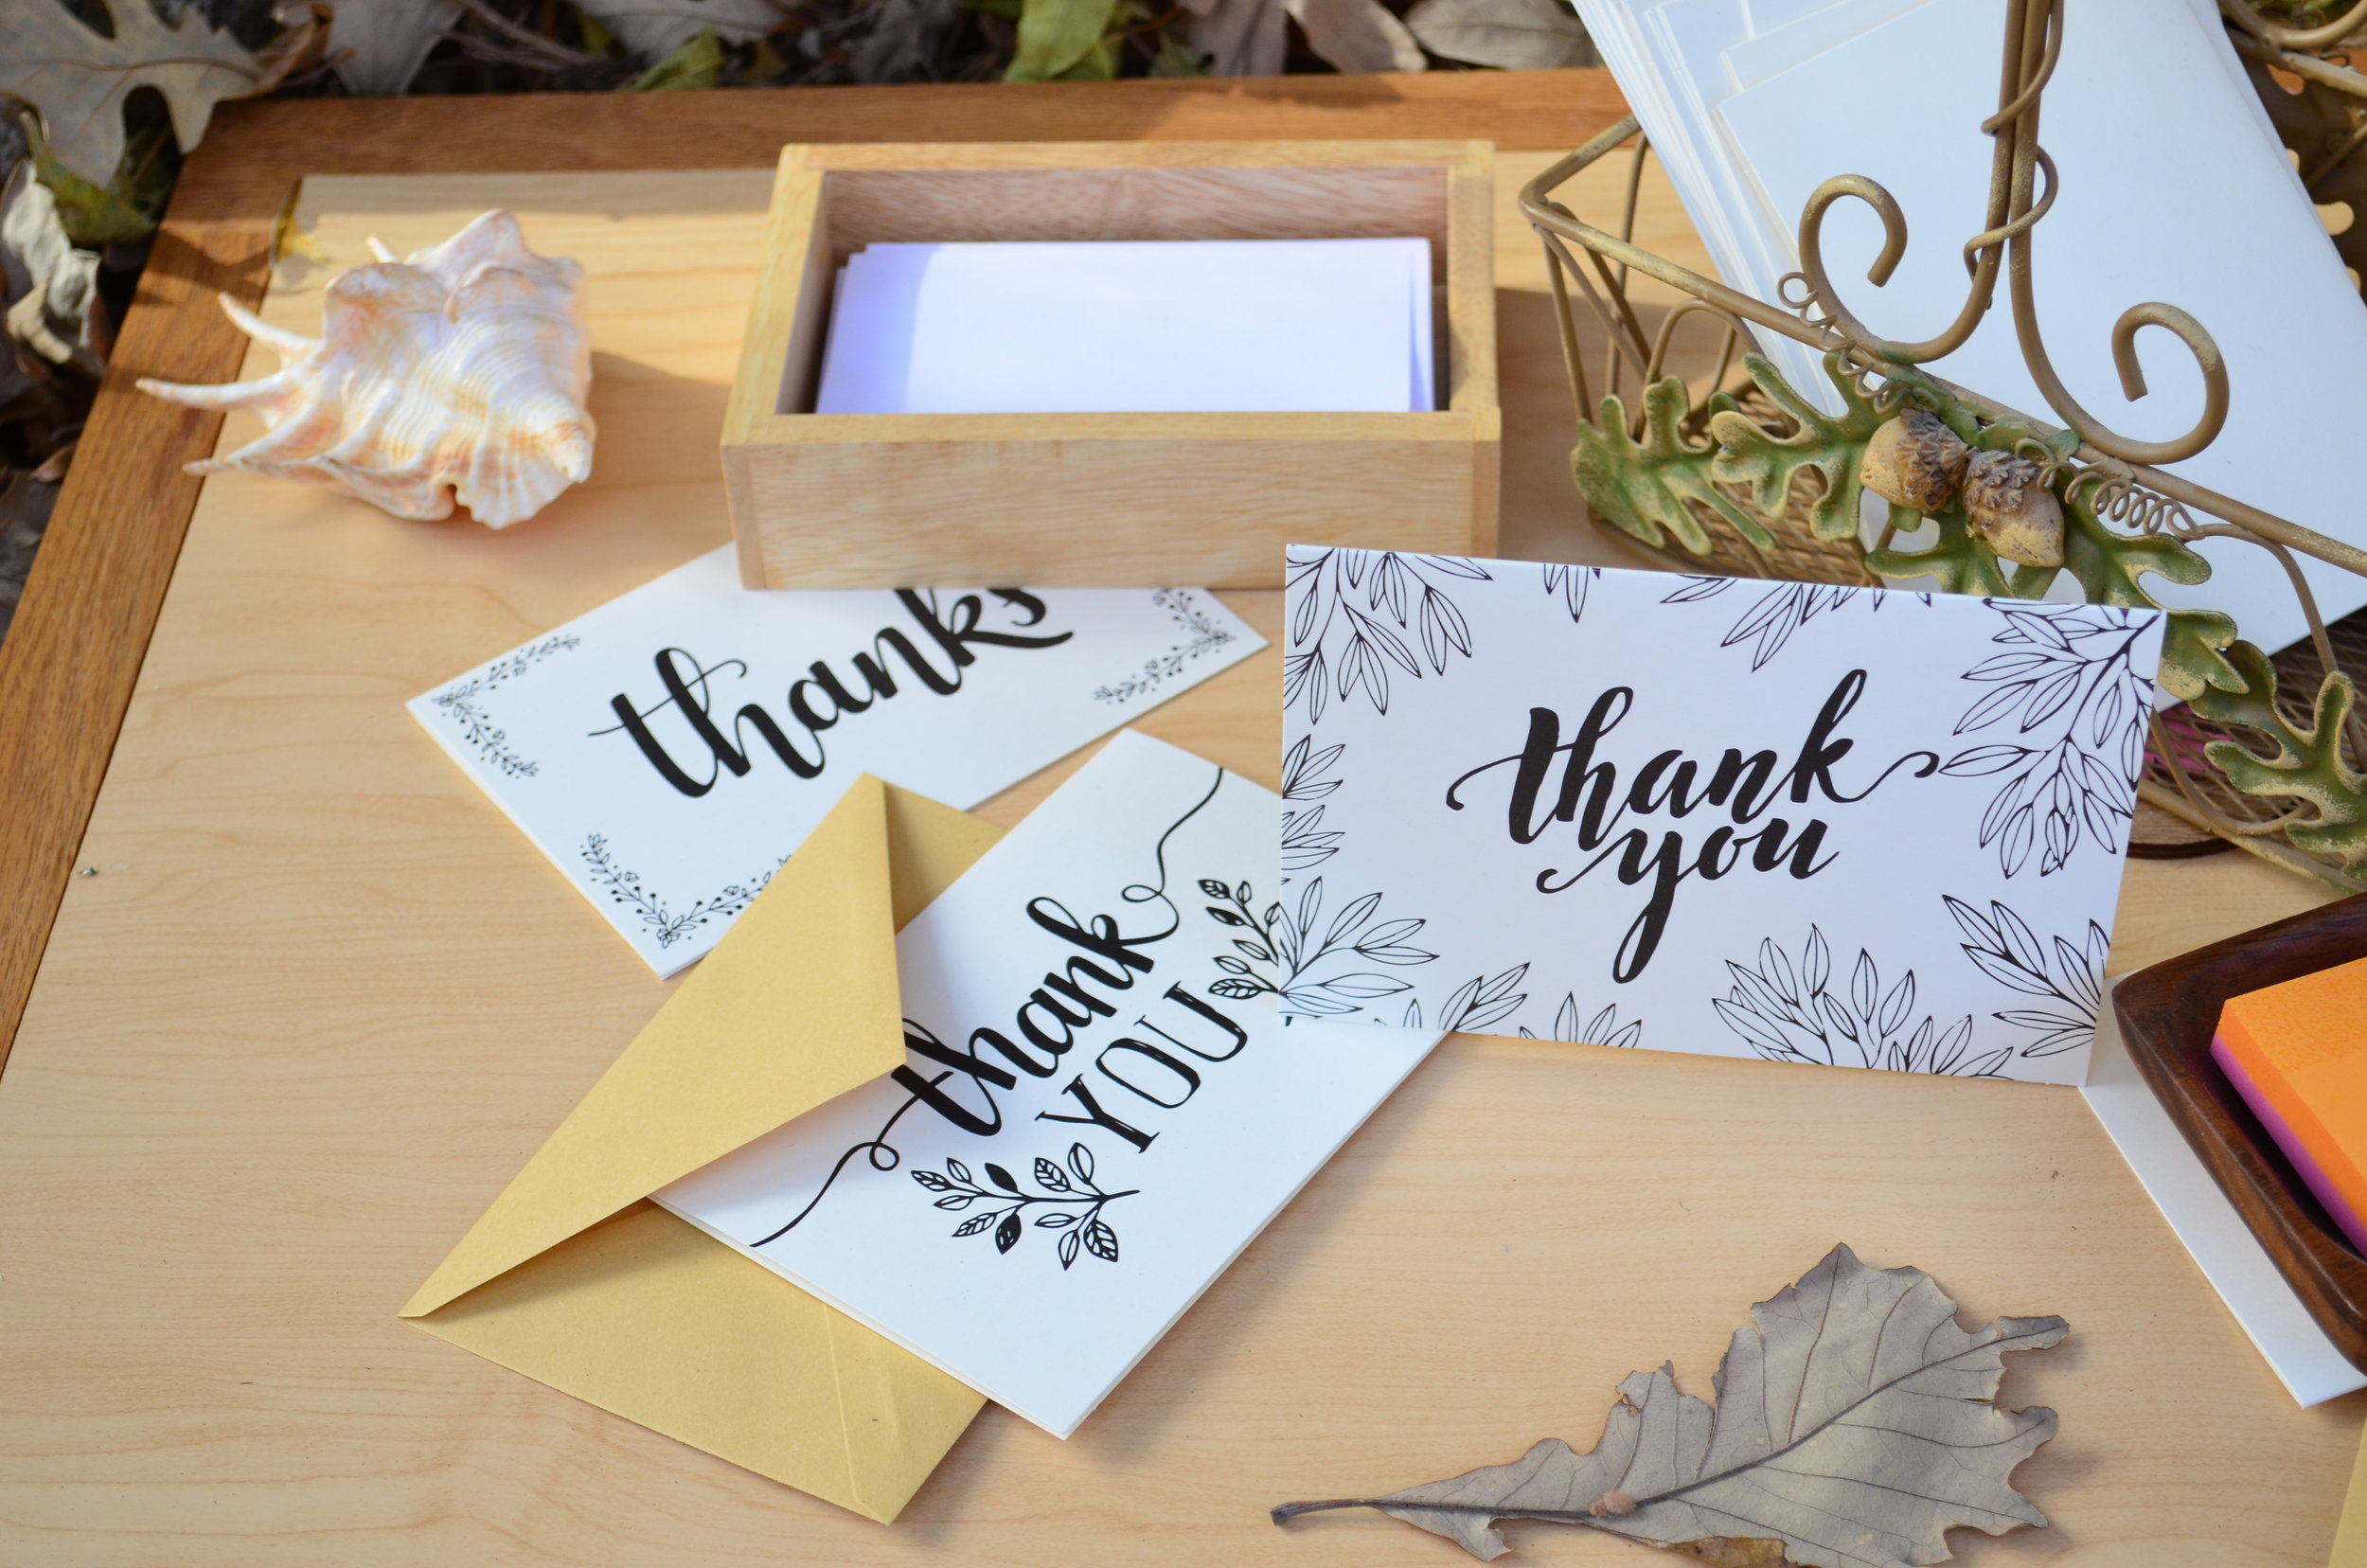 for Birthday 4x6 Thank You Cards 20 Pack Brown Craft Paper 4 Designs of Assorted Blank Thank You Greeting Cards with Envelopes Wedding Bridal/Baby Shower Celebrations